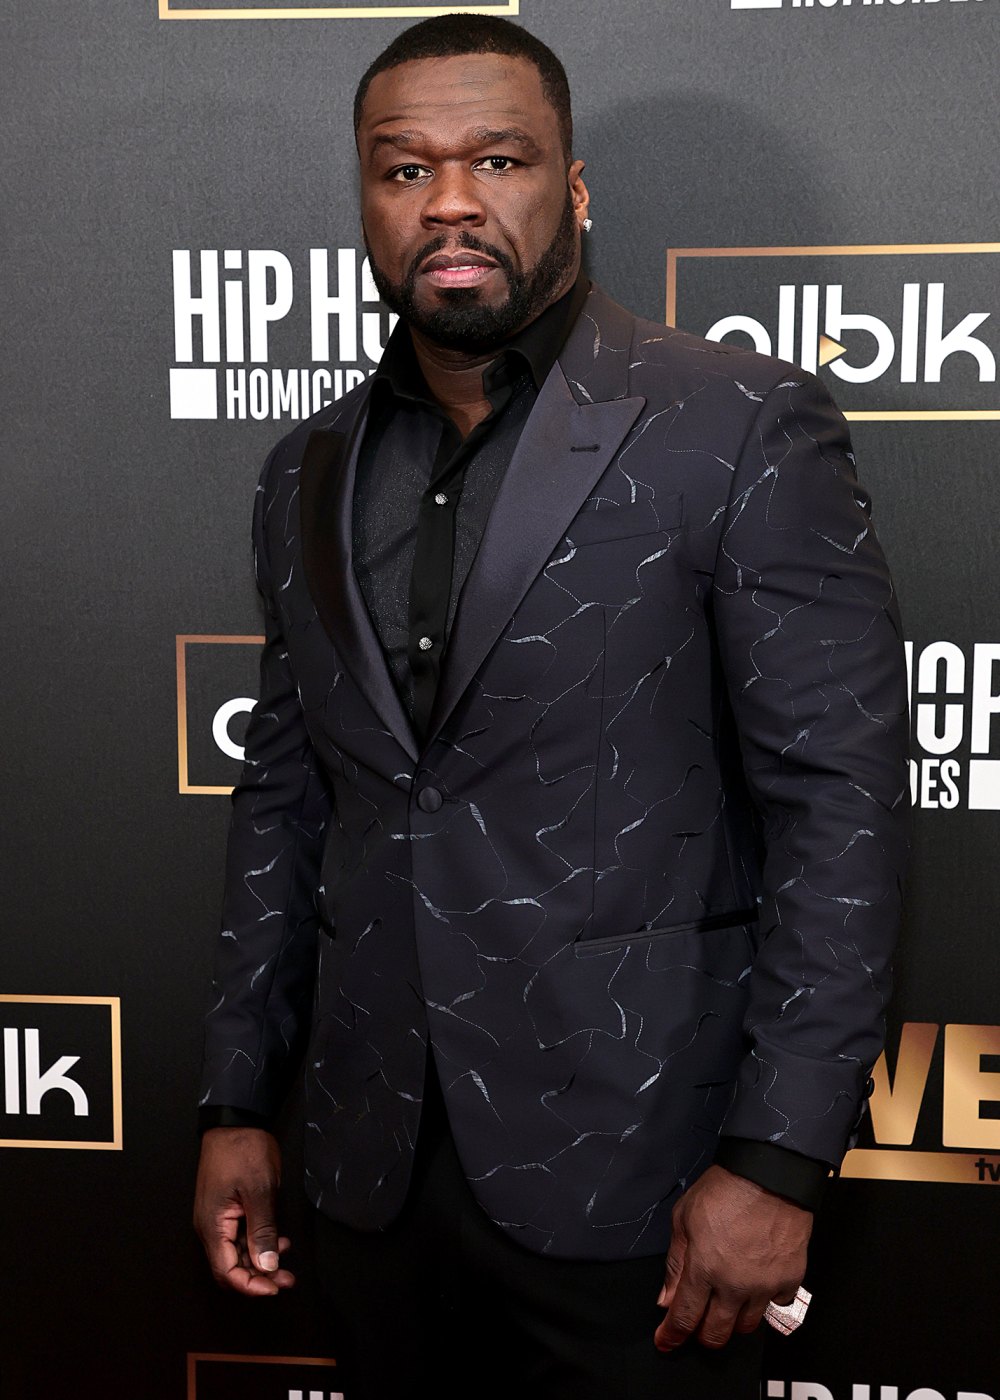 50 Cent Mocks His Own Movie Poster From 'Expendables 4': 'Did We Run Out of Money?'